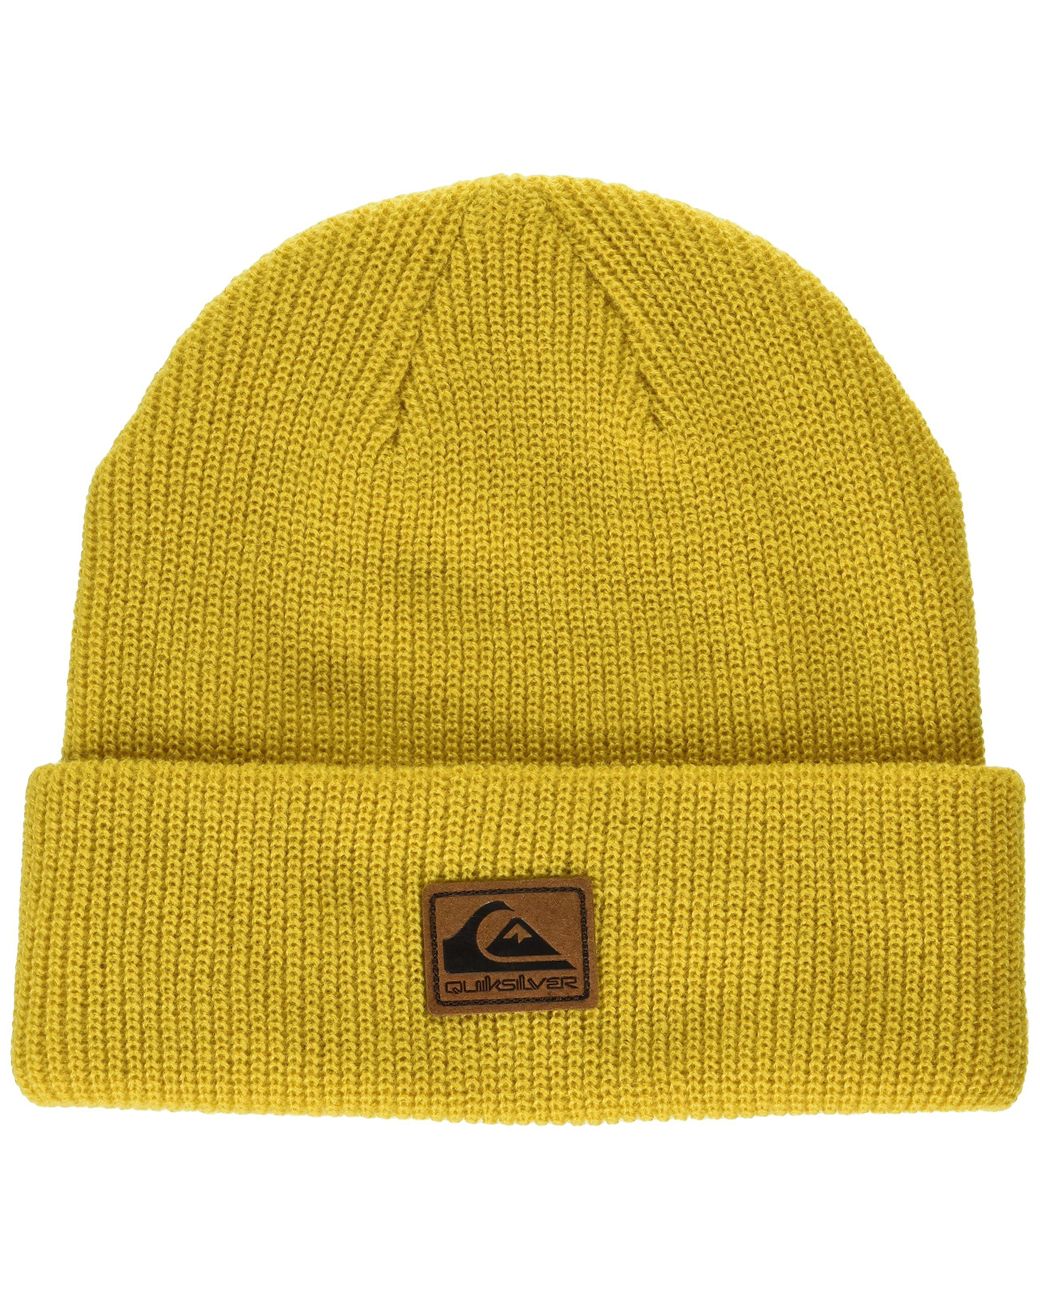 2 Lyst Beanie in Men | Performer Yellow for Quiksilver